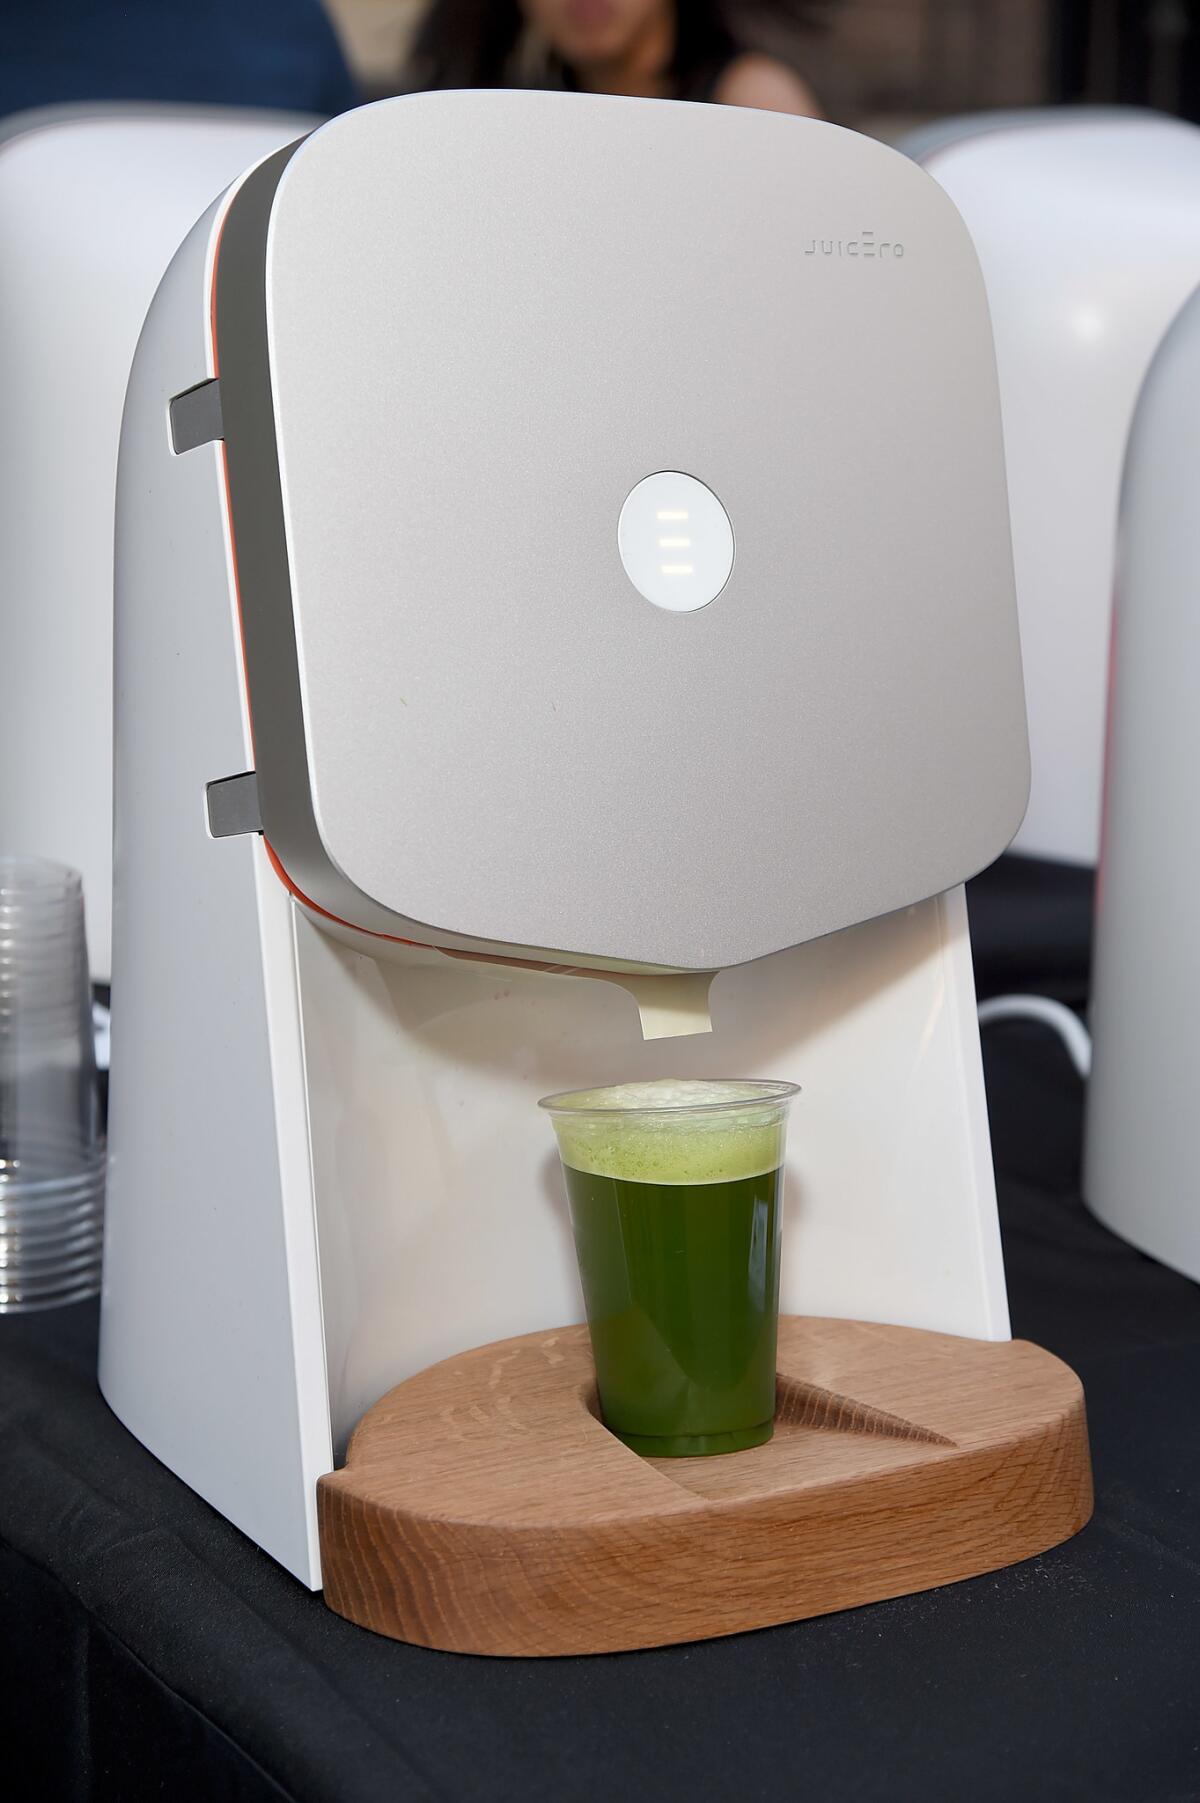 A Juicero juicer. (Michael Kovac / Getty Images)